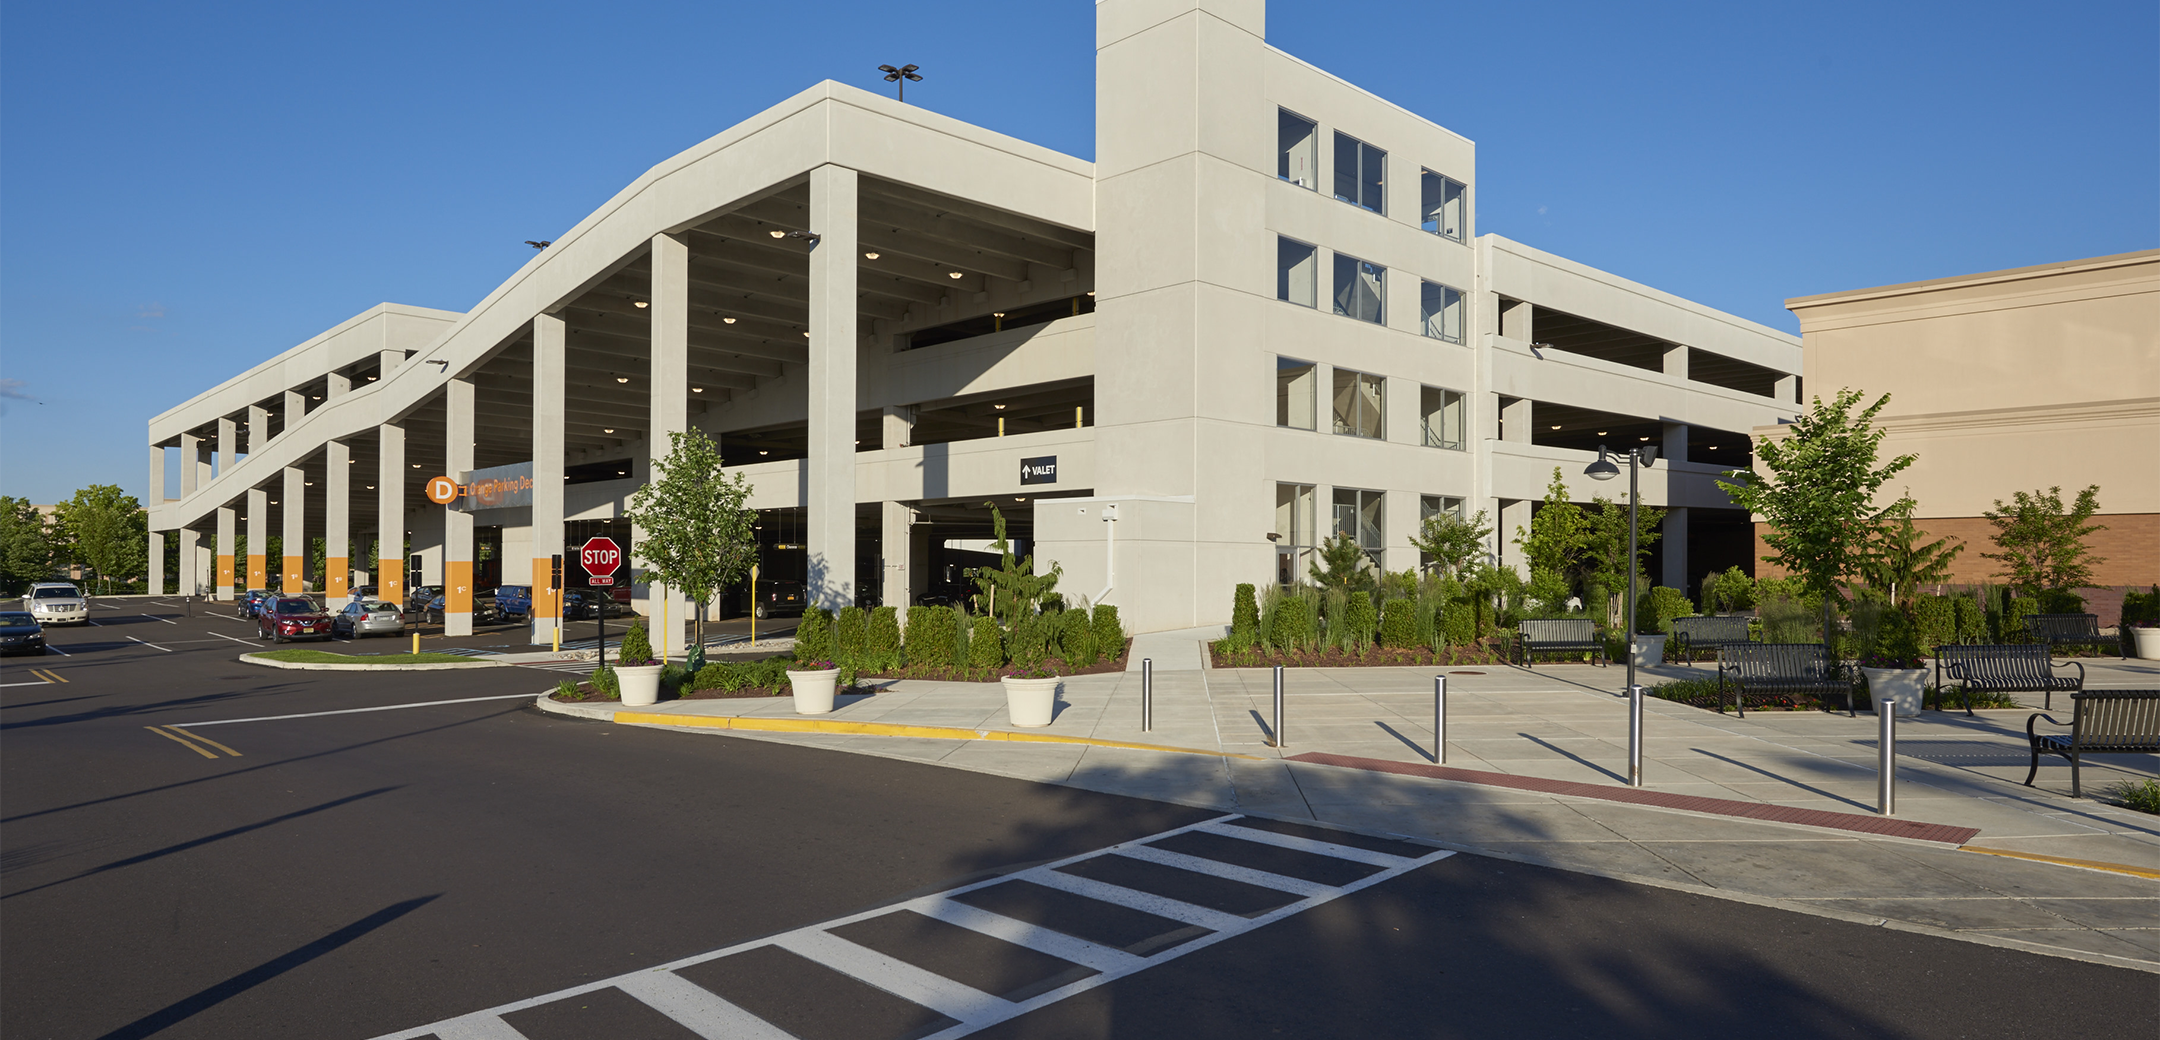 The exterior of the KOP Expansion parking lot building, showcasing the three stories, support pillars, ramps going up to the higher floors and driveway in the foreground.